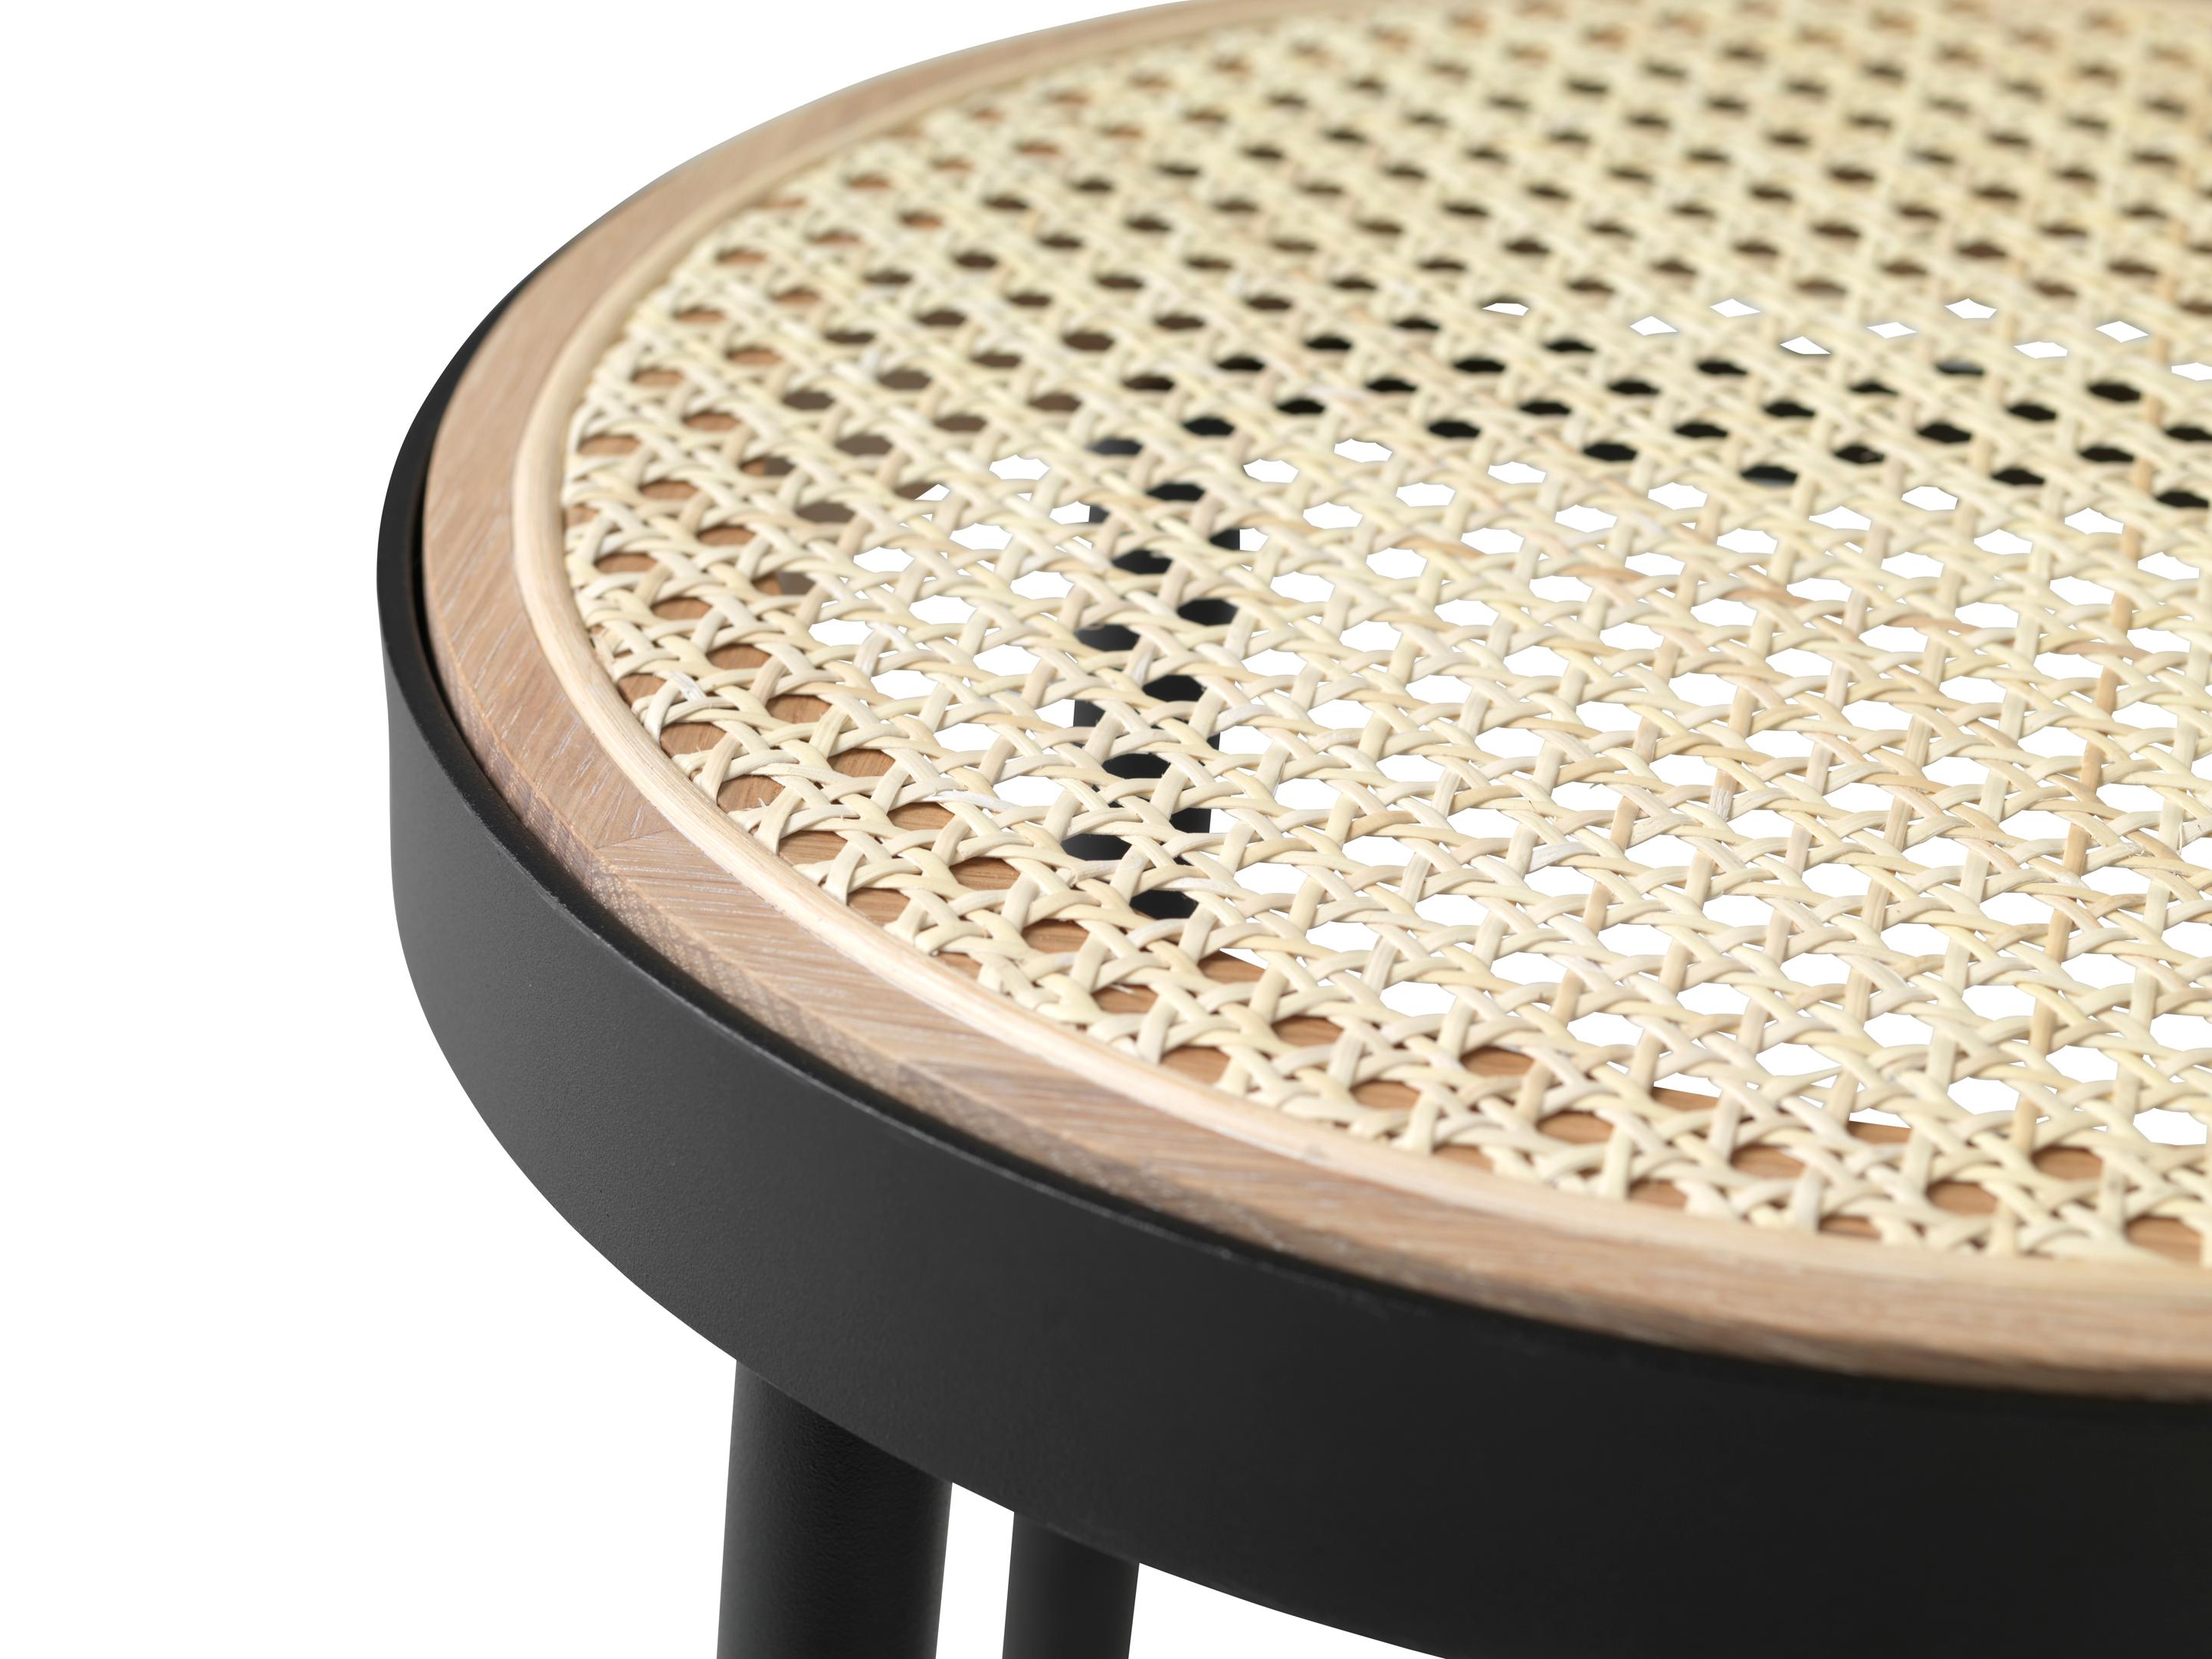 An elegant, Classic stool with a wicker seat and simple metal frame. With its French rattan and oak seat and simple black metal legs, this unique bar stool will look great at any bar. Together with the idiom, the choice of materials creates a warm,